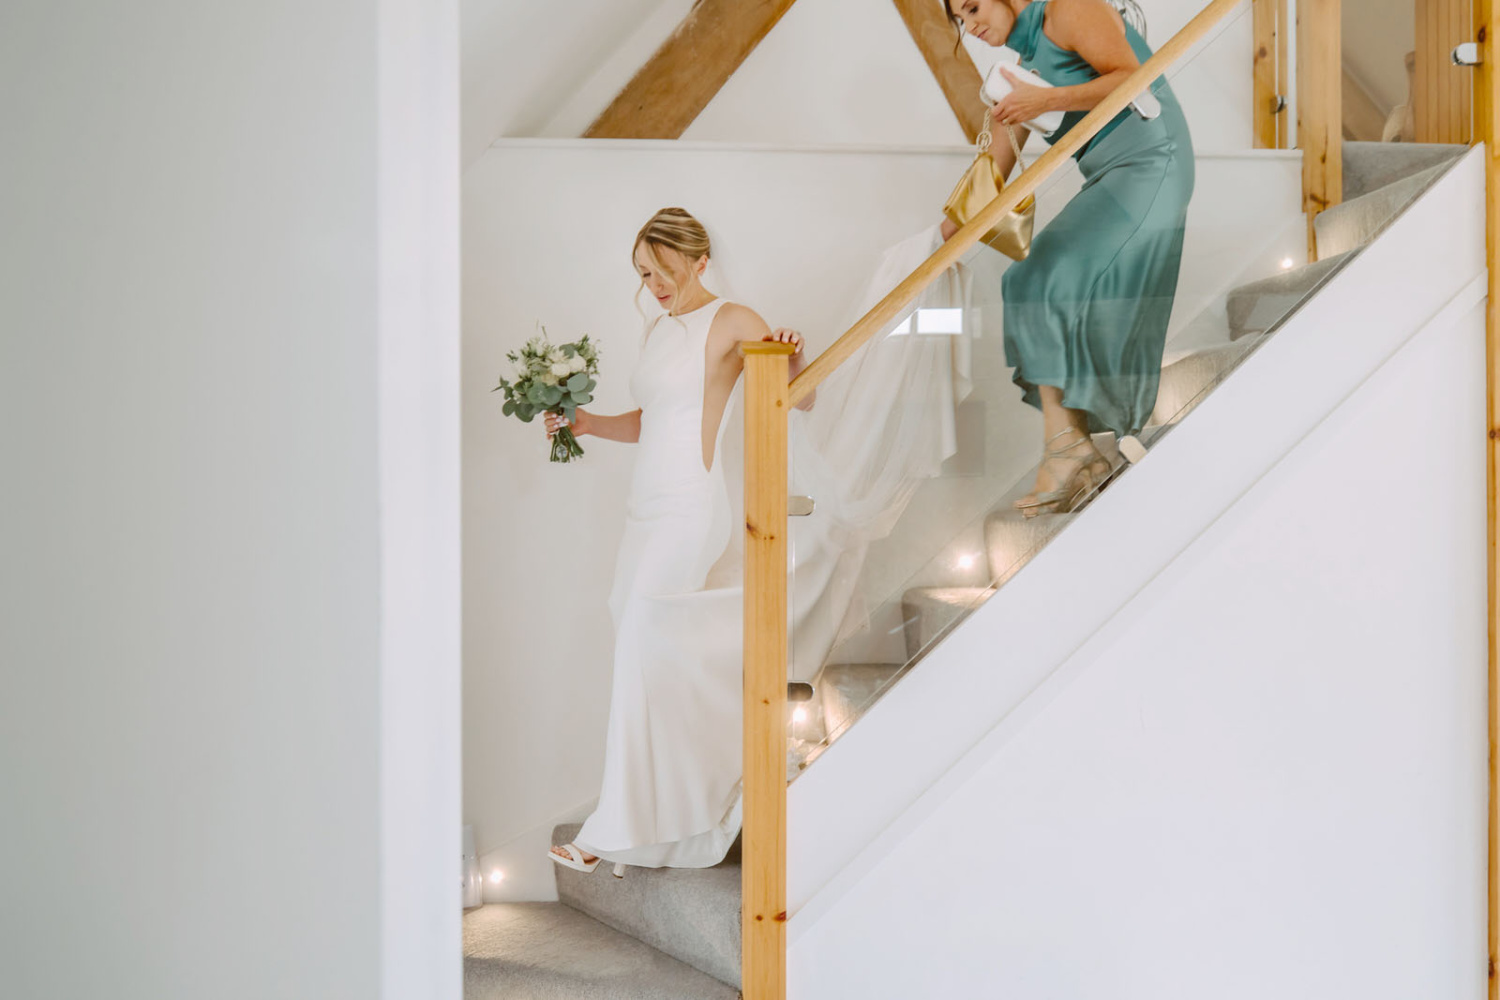 The bride and her mum walking down the stairs in a wedding dress.